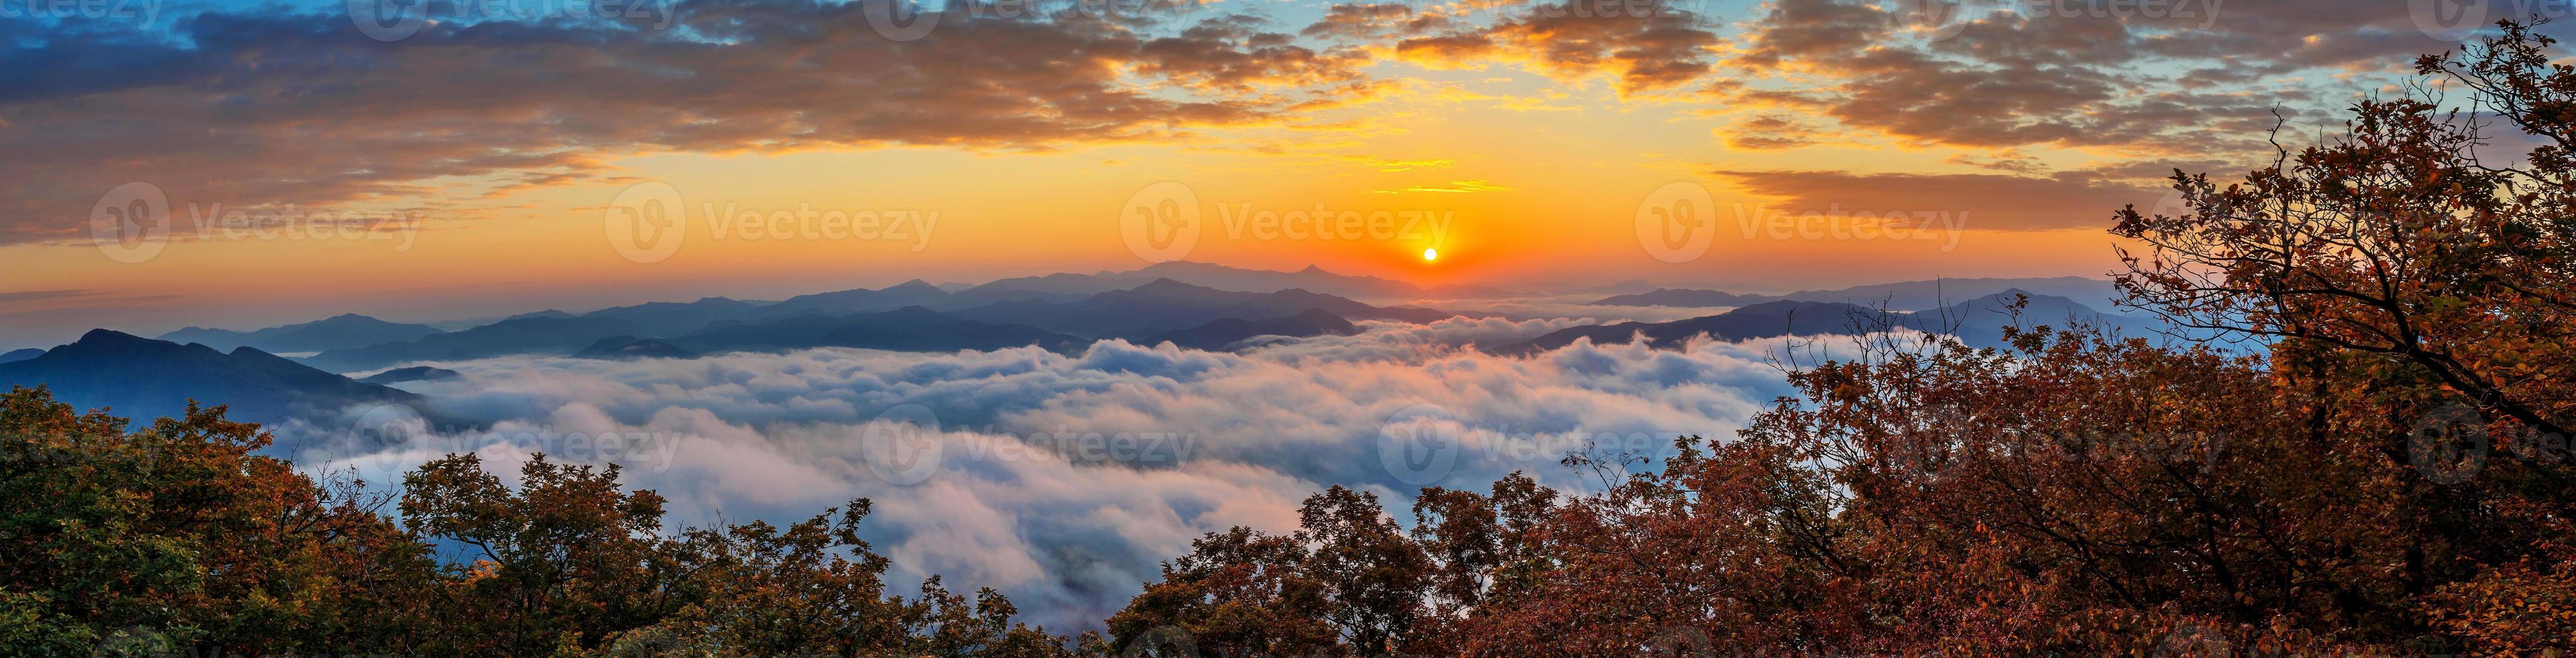 Seoraksan mountains is covered by morning fog and sunrise photo